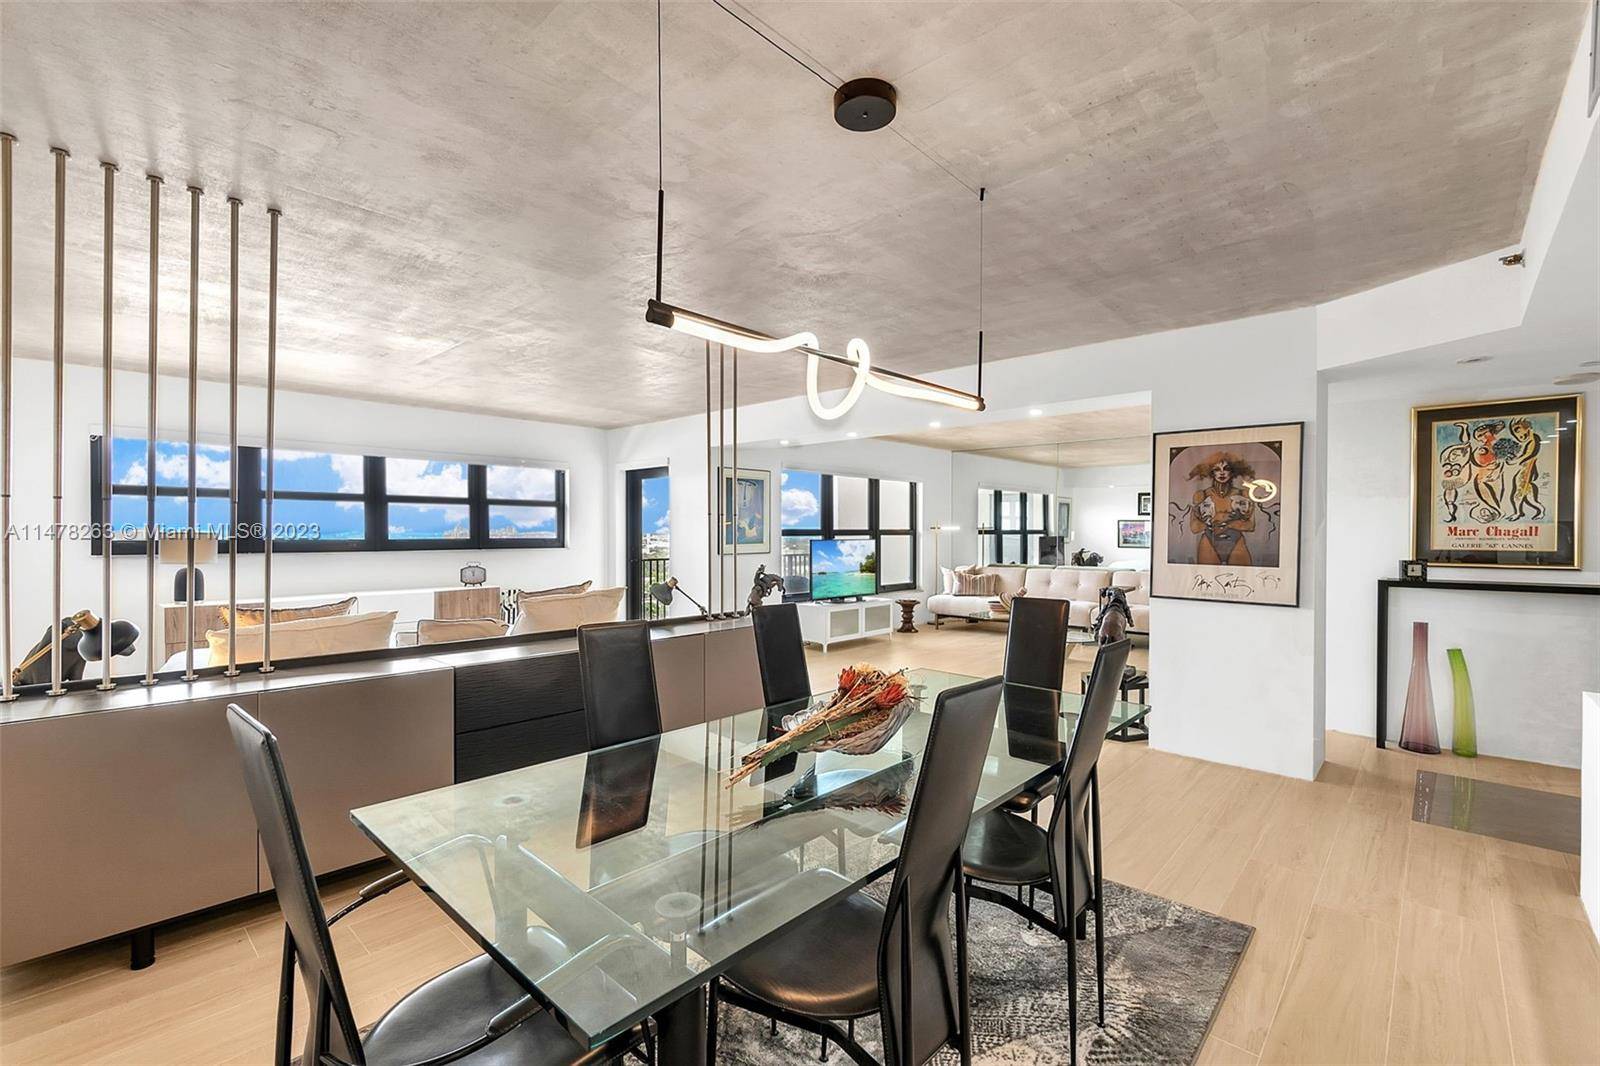 DESIGNER RENOVATED 2021, MAGAZINE WORTHY, OPEN LOFT DESIGN, ONE BEDROOM SOUTH FACING PENTHOUSE WITH THE BEST MILLION DOLLAR OCEAN AND INTRACOASTAL VIEWS AT THE TOWER.